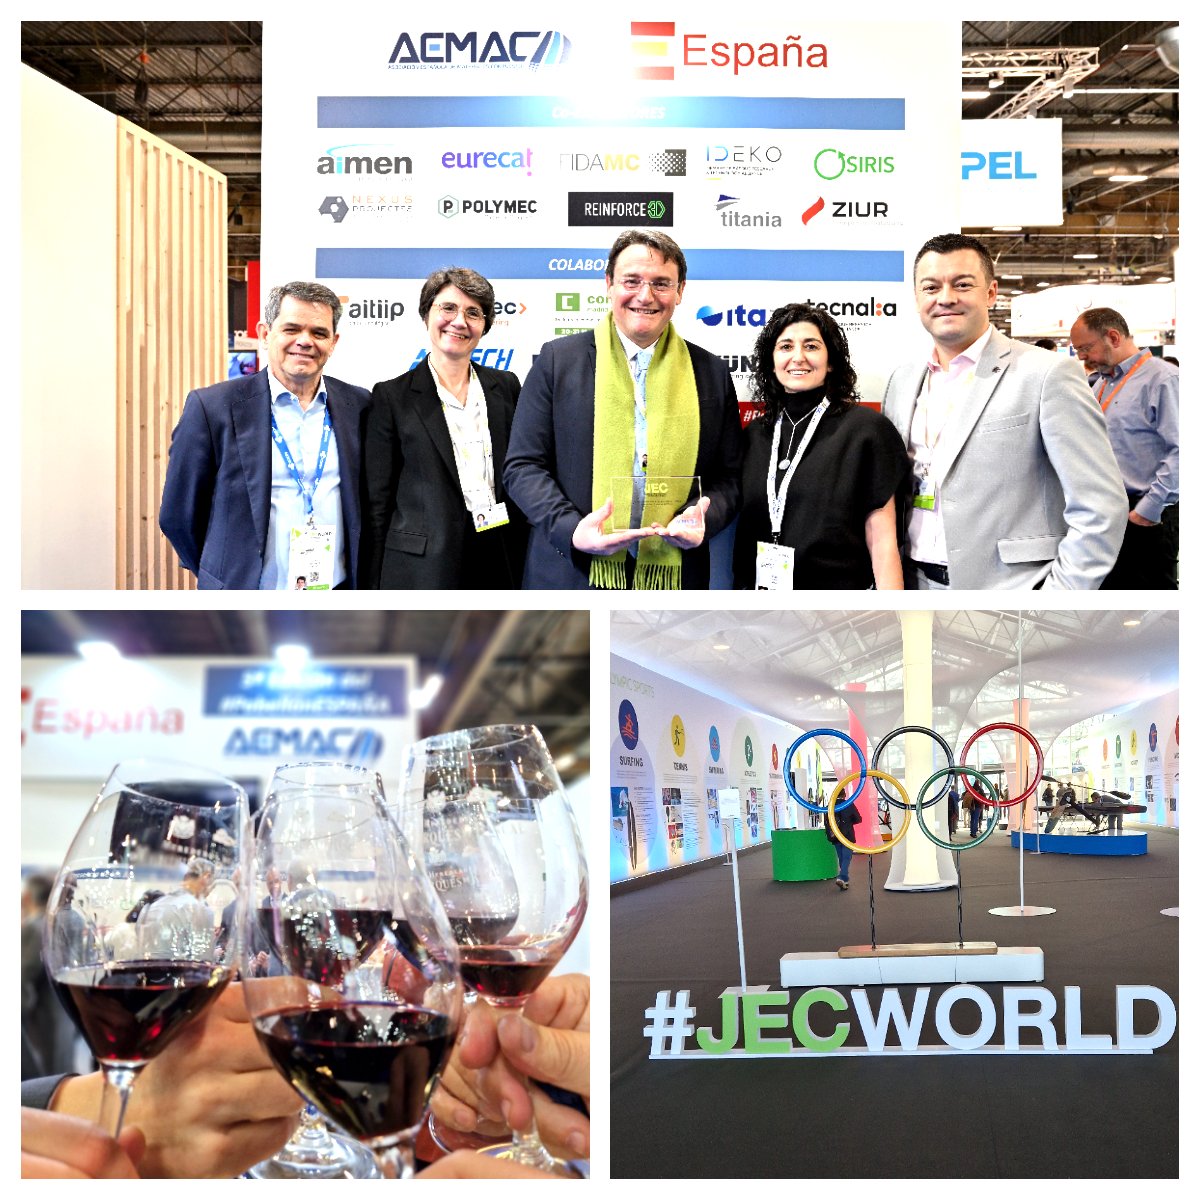 It was a great honour to receive some members of @JECComposites at #PabellónESPAÑAV. The #Spanish #pavilion, which represents #CompositeMaterials from #Spain & #AsociadosAEMAC, would not have been possible over these 5 years, without them & our #collaborators. #JECWorld2024